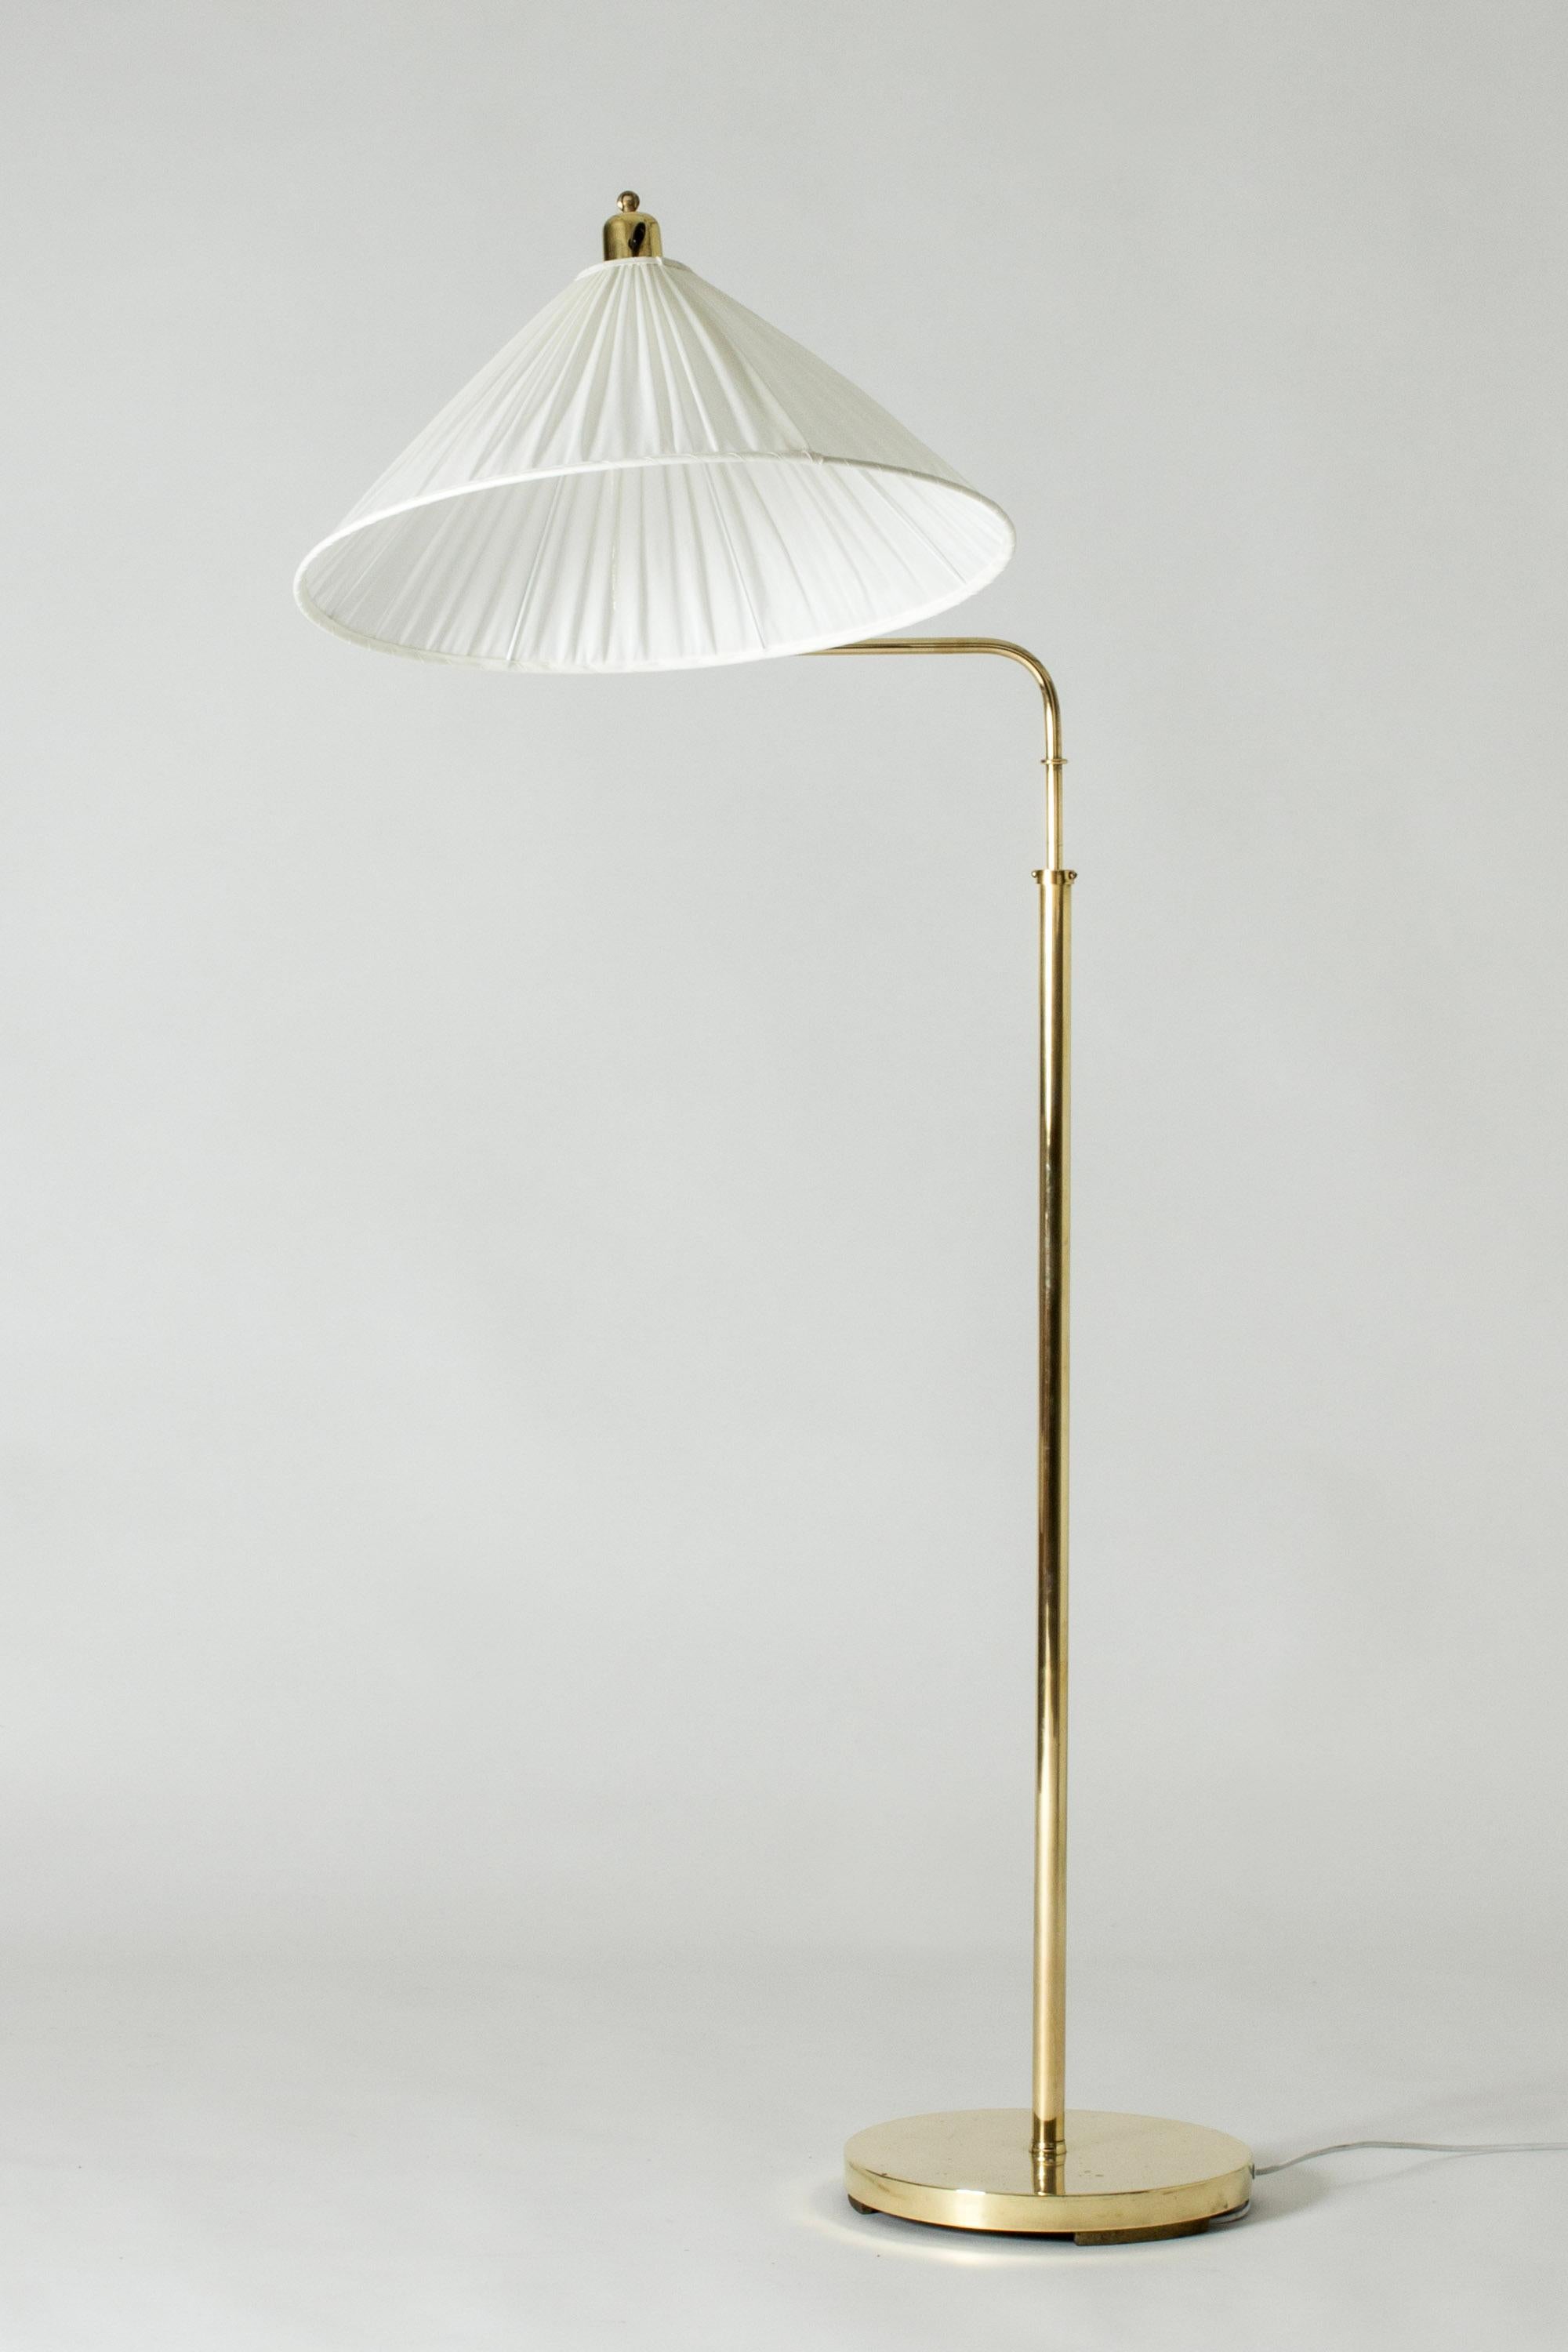 Swedish Modern brass floor lamp with a long neck that can extend and elevate the shade in different directions. Adjustable height. Wide brass base with a solid weight.

Height adjustable between 135 and 185 cm.